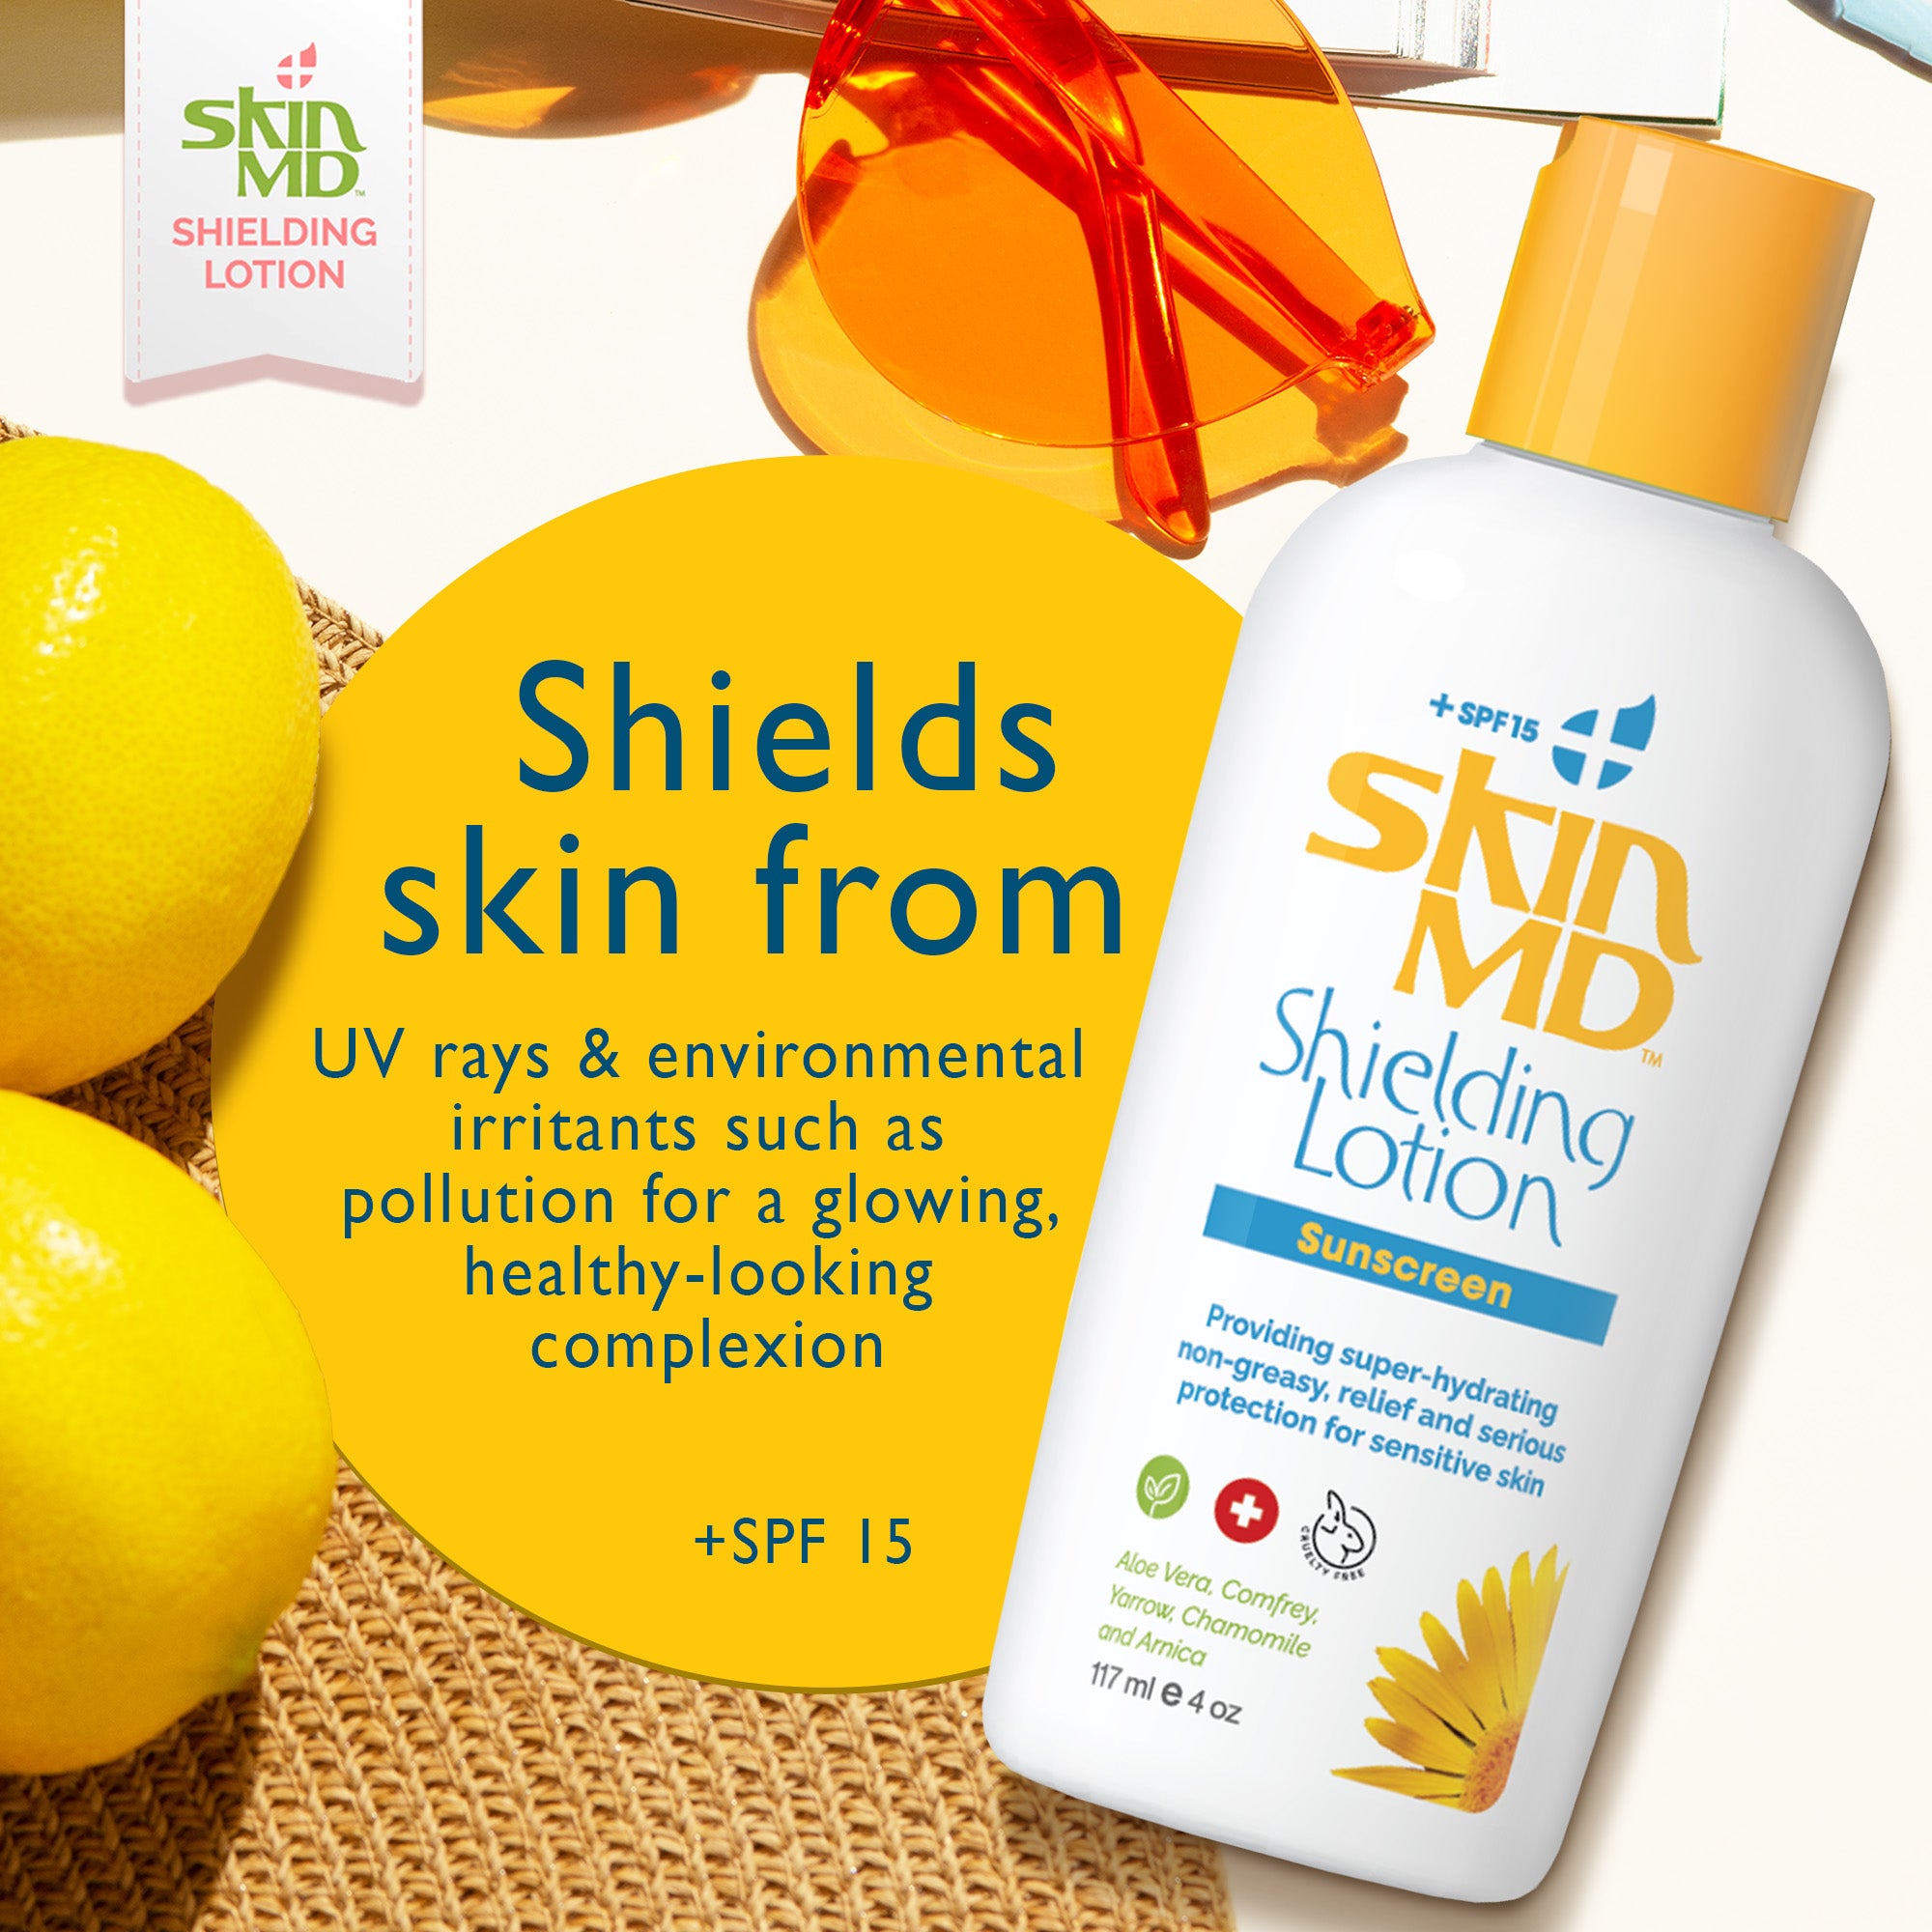 Skin MD Shielding Lotion Sunscreen with SPF 15 4oz